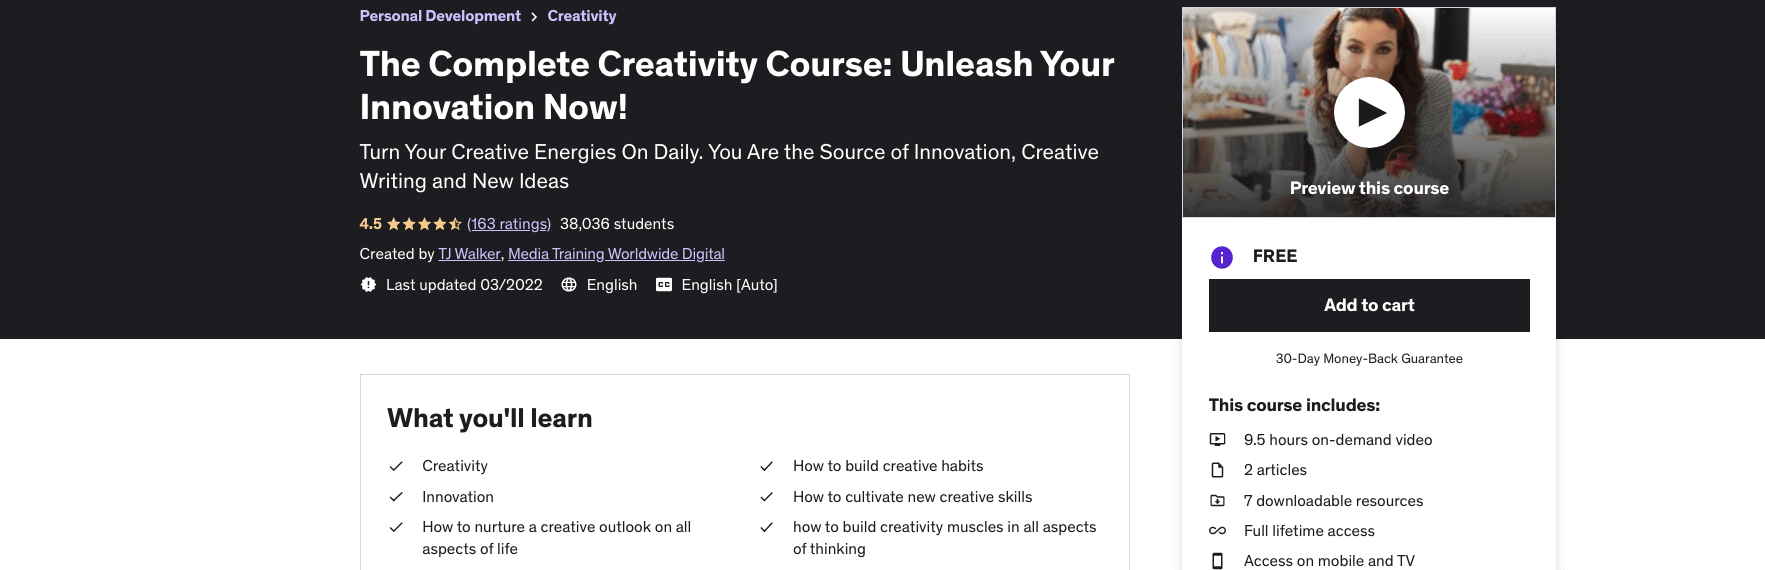 The Complete Creativity Course: Unleash Your Innovation Now!